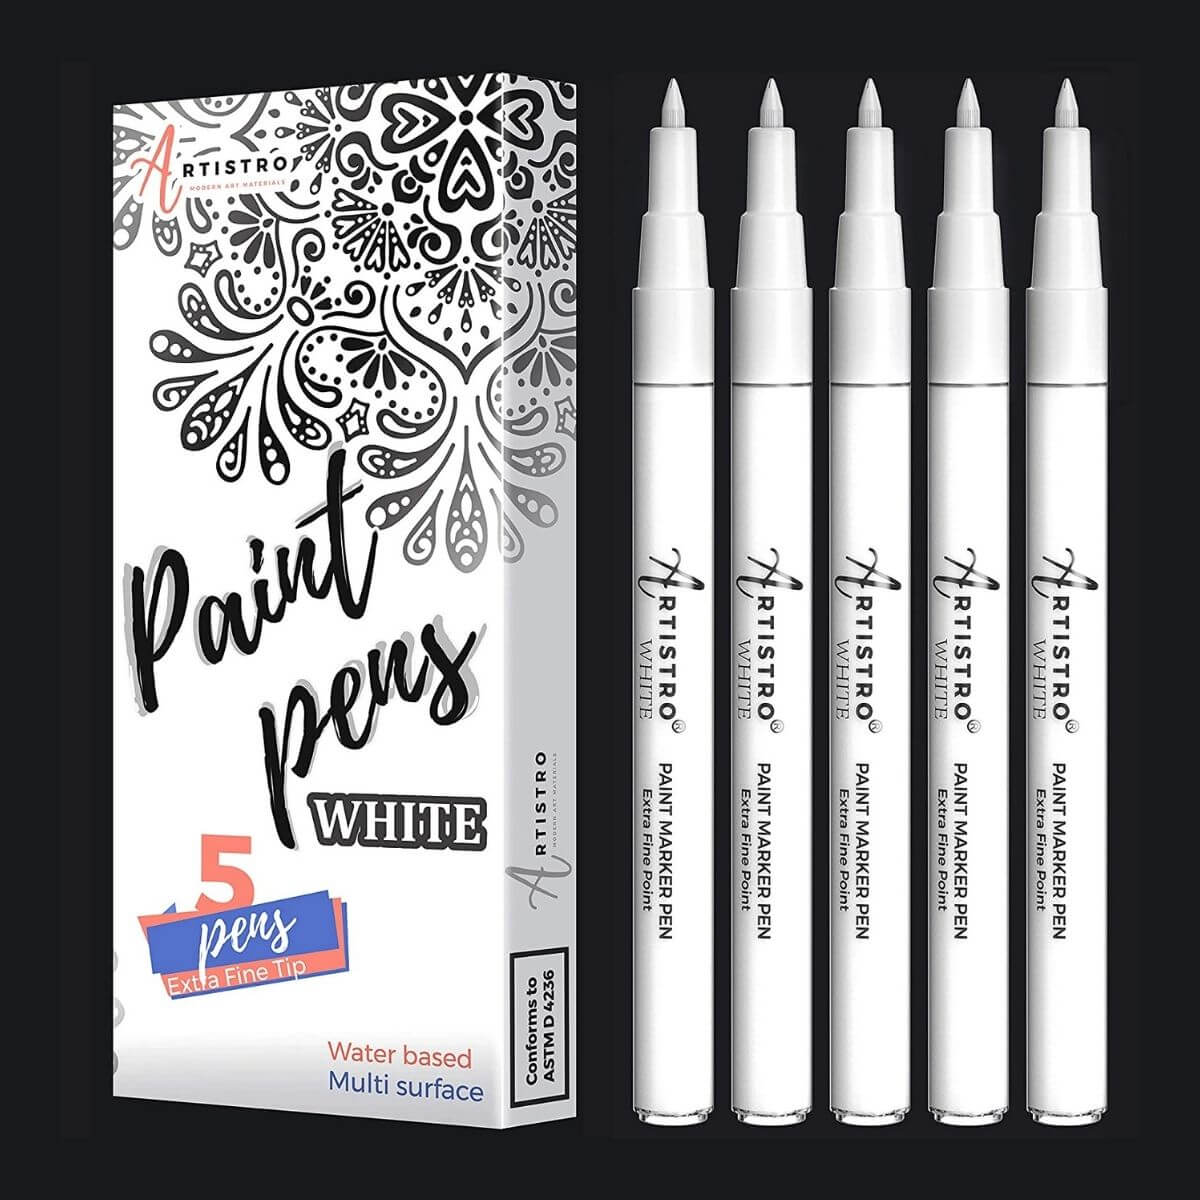 PINTAR Black & White Markers/Pens Extra Fine Tip for Rock Painting